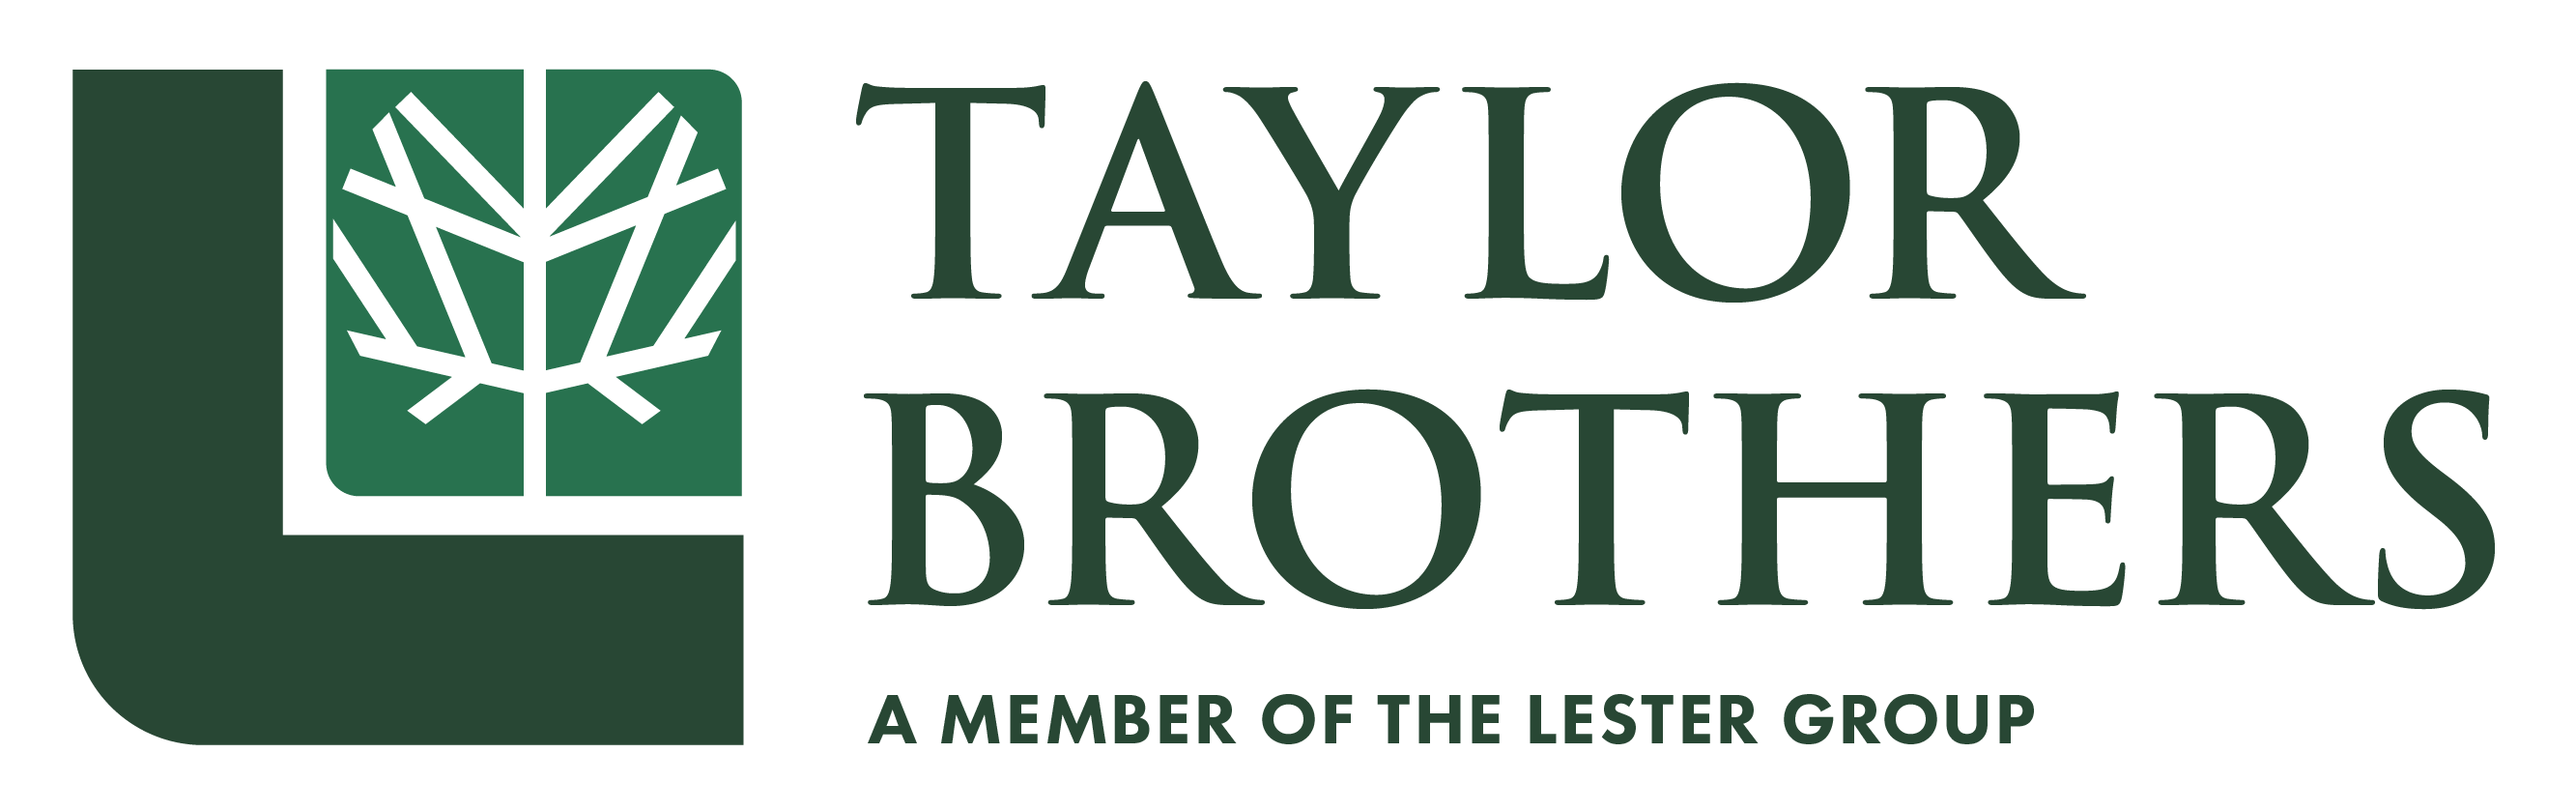 Taylor Brothers